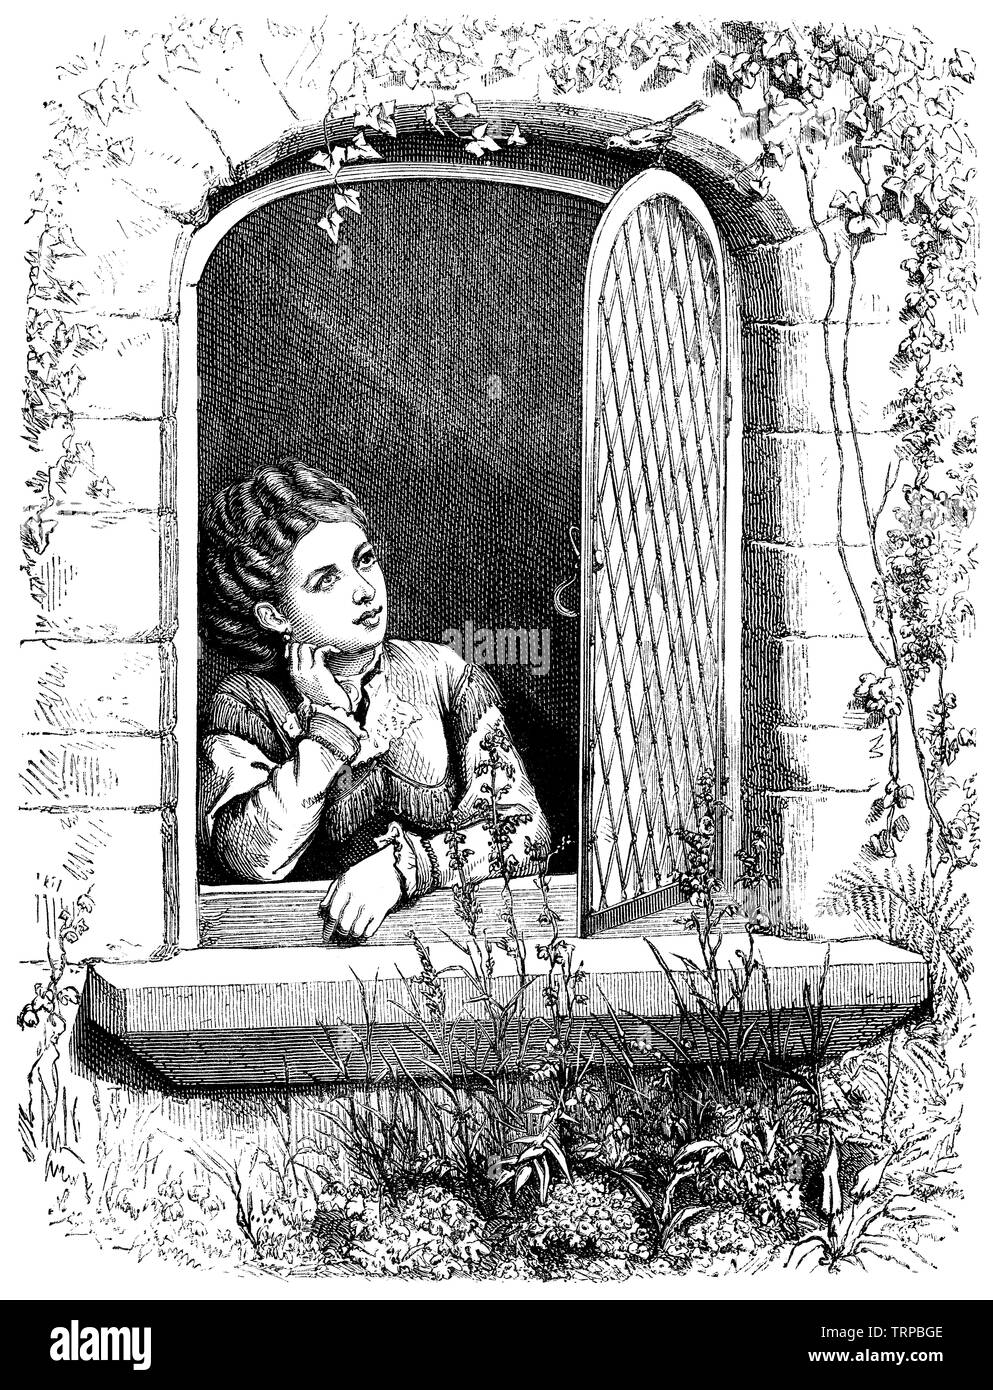 1872 engraving of a contemplative woman at a window. Stock Photo